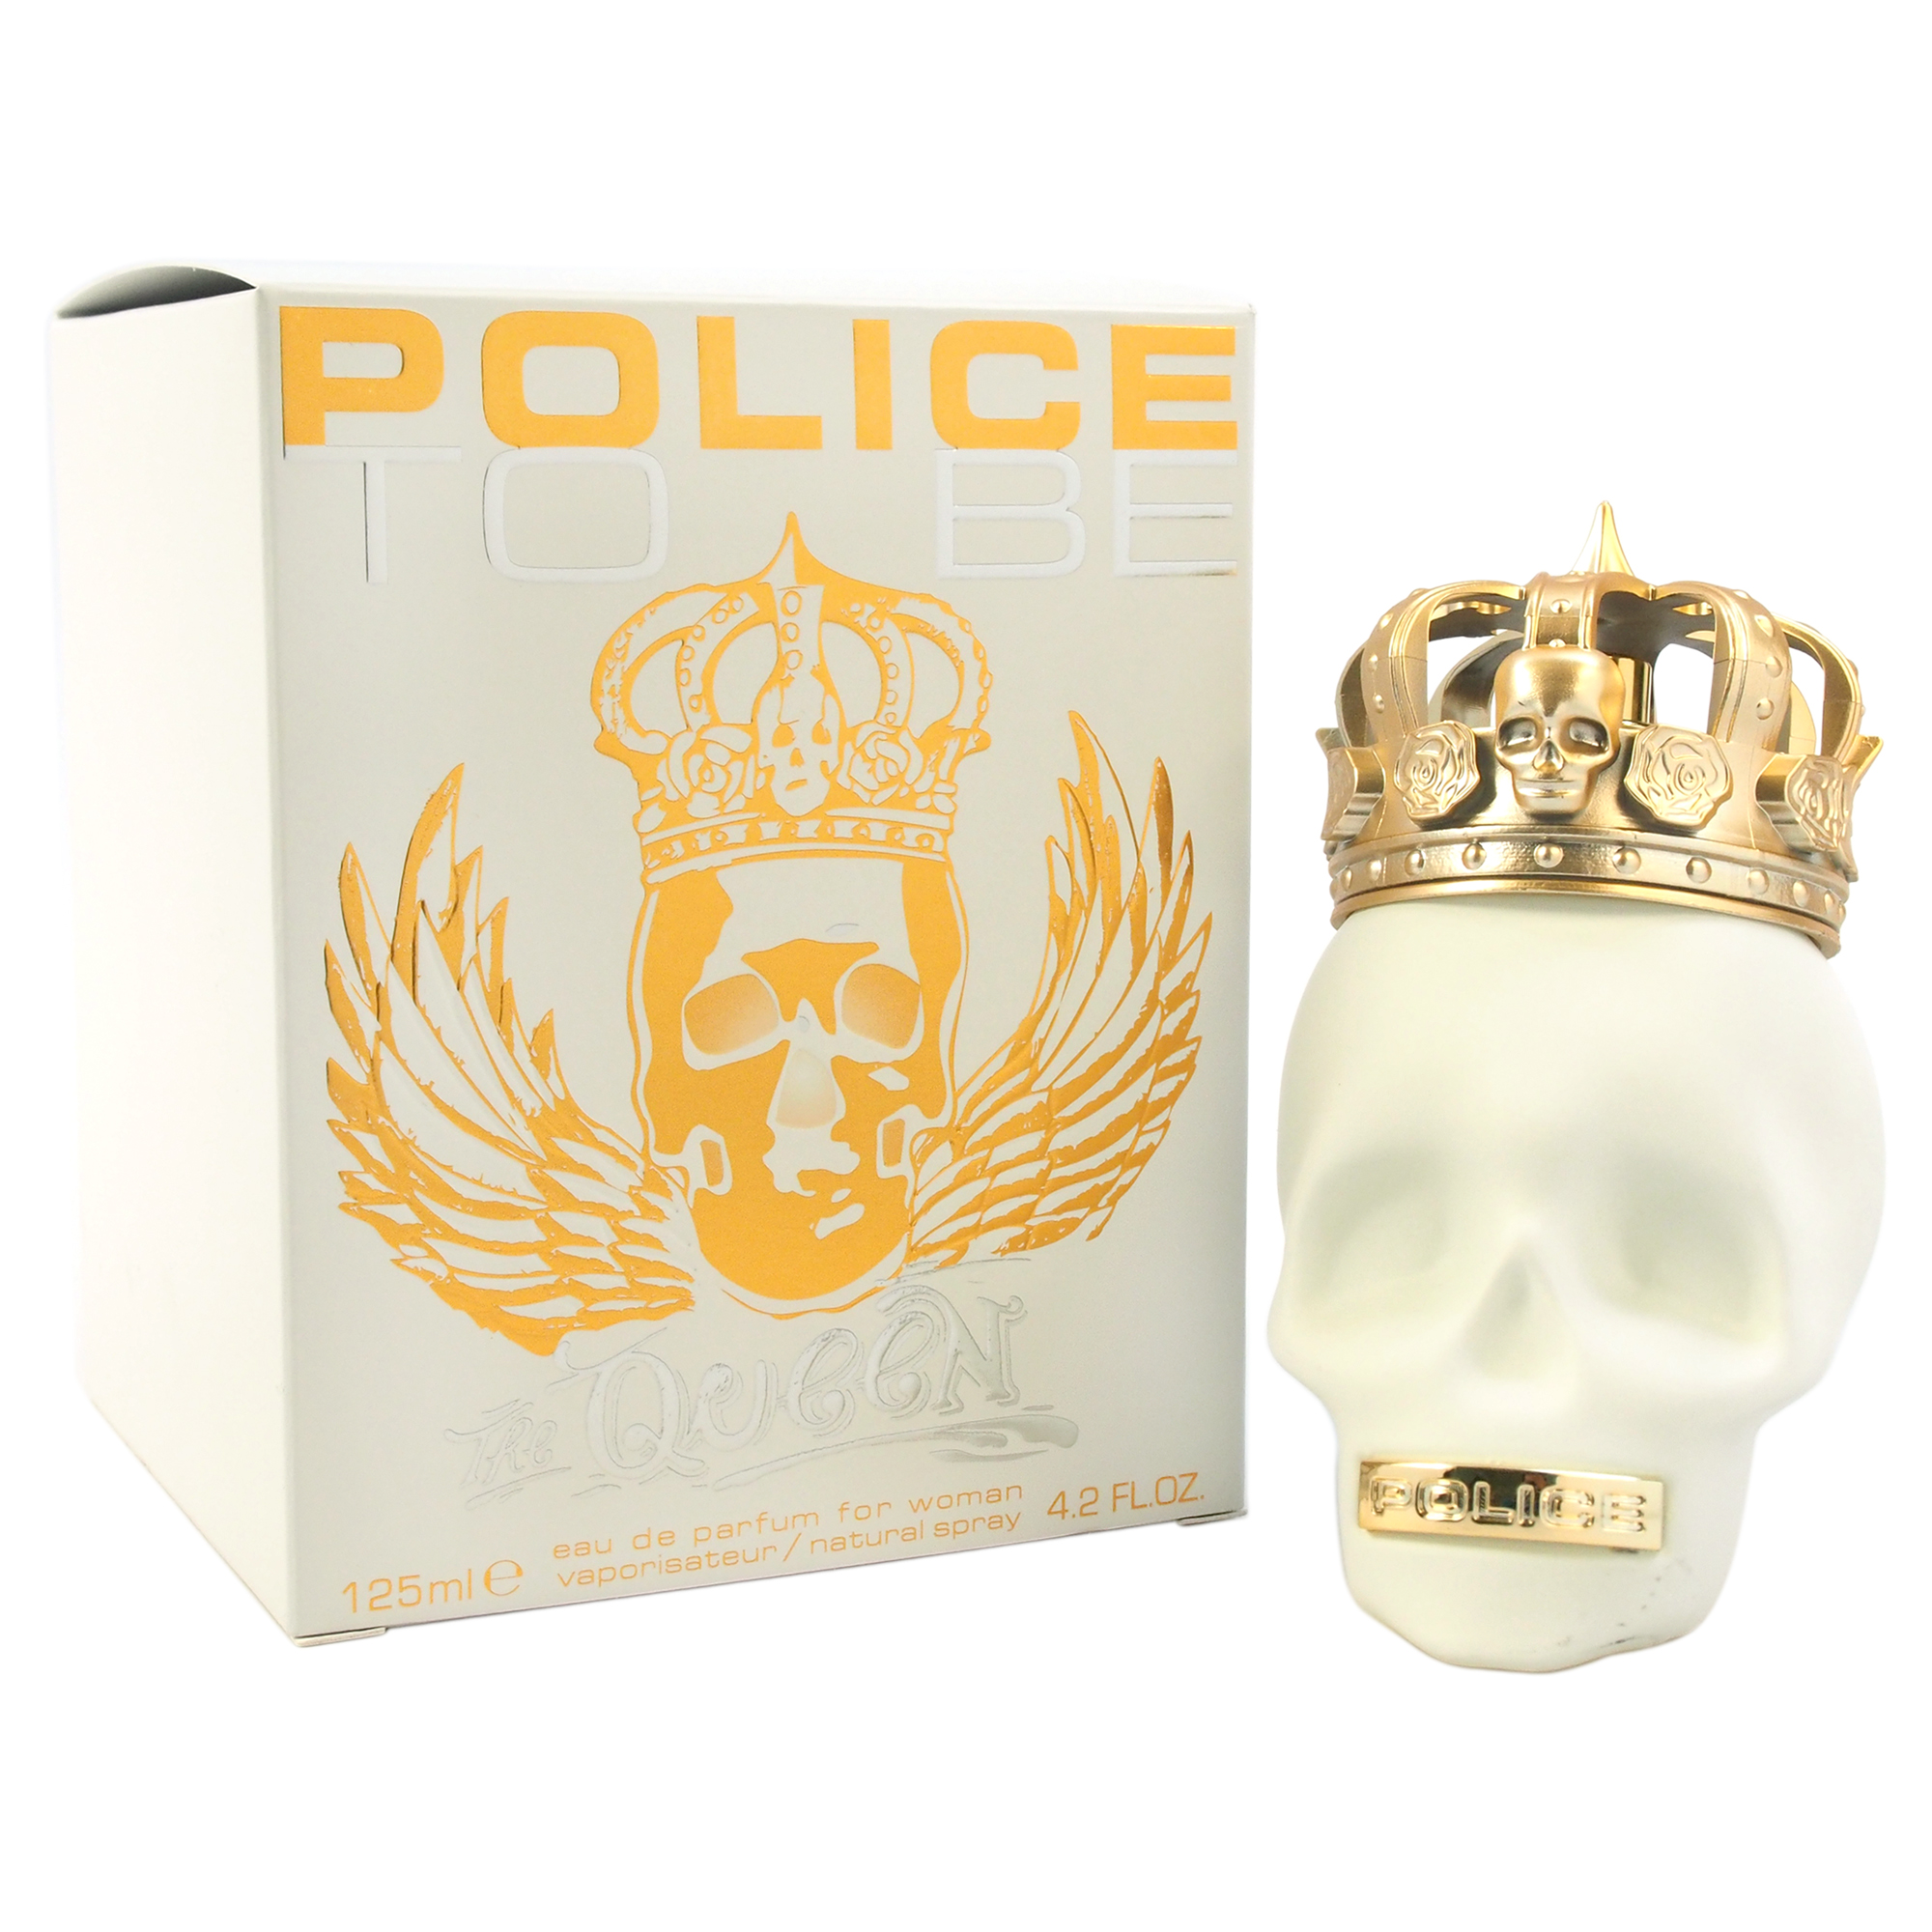 POLICE TO BE THE QUEEN by Police for Women - 4.2 oz EDP Spray